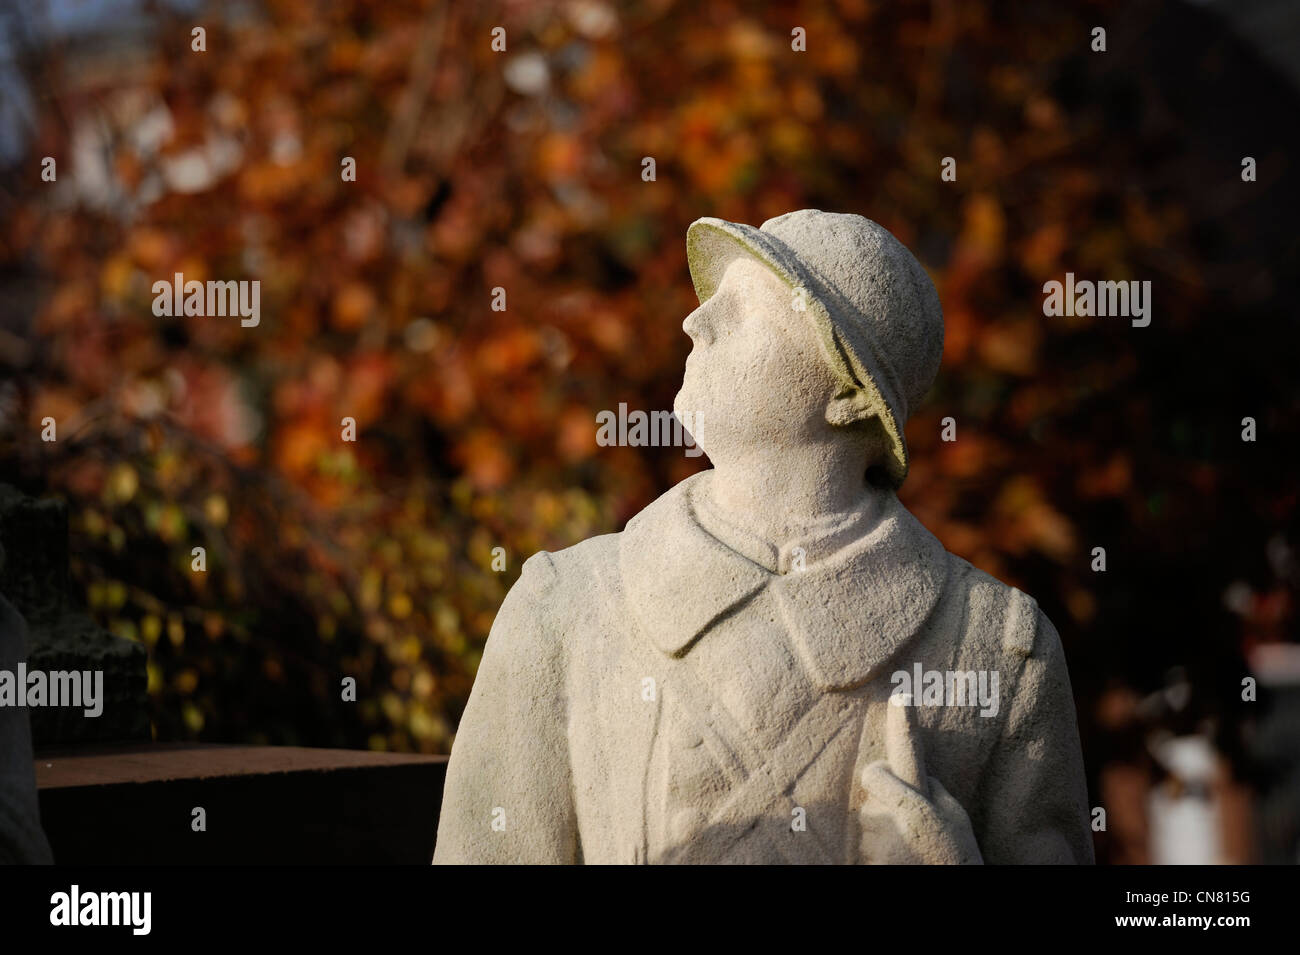 France, Nord, La Bassee, statue of a soldier of the 14-18 war with an autumn colors background Stock Photo